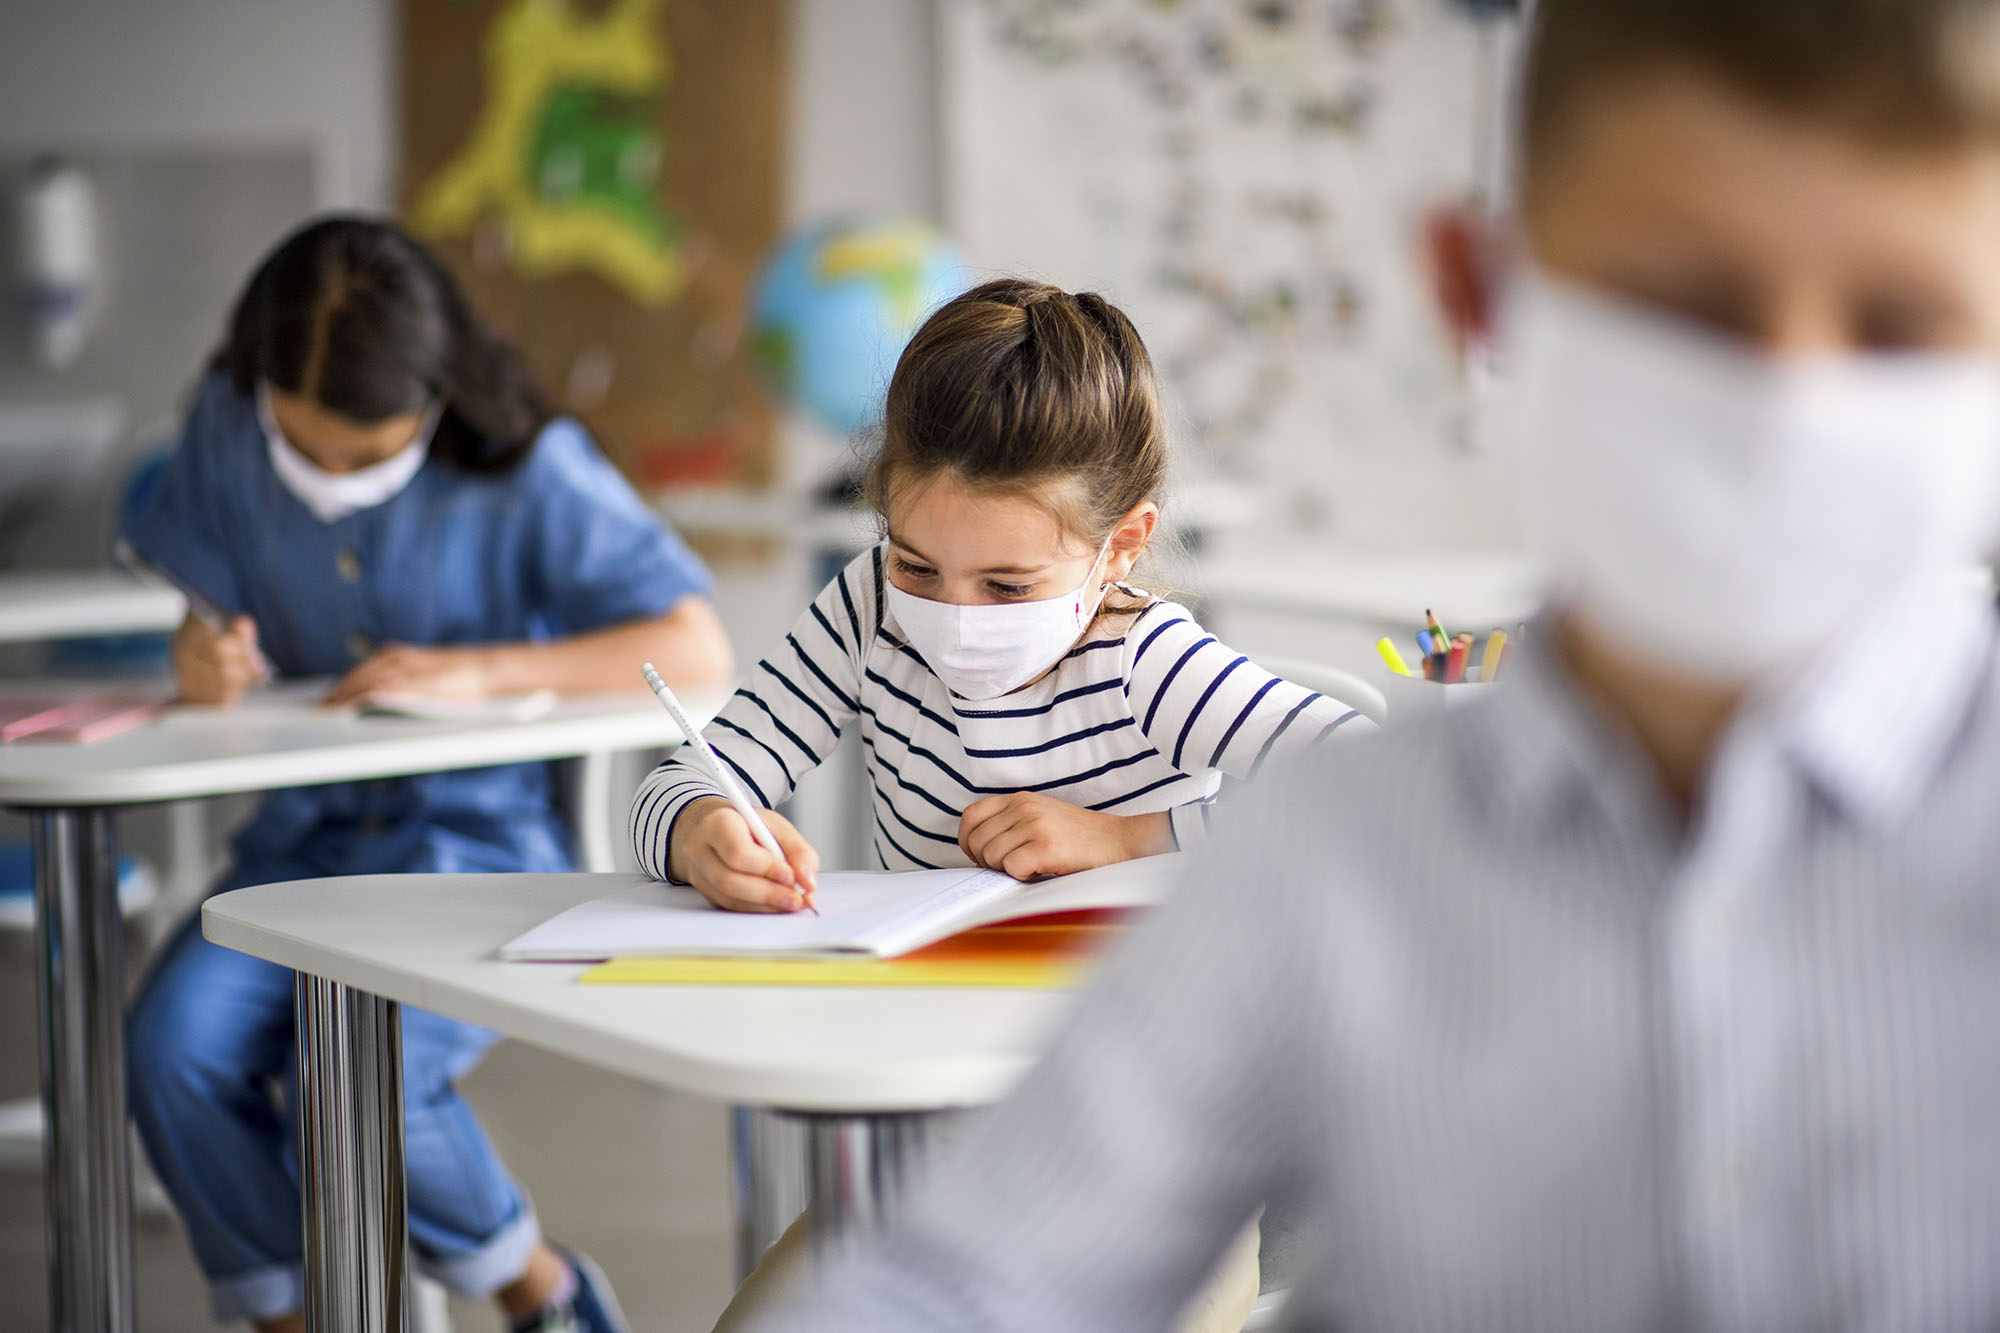 Children in class writing in notebooks socially distanced wearing masks